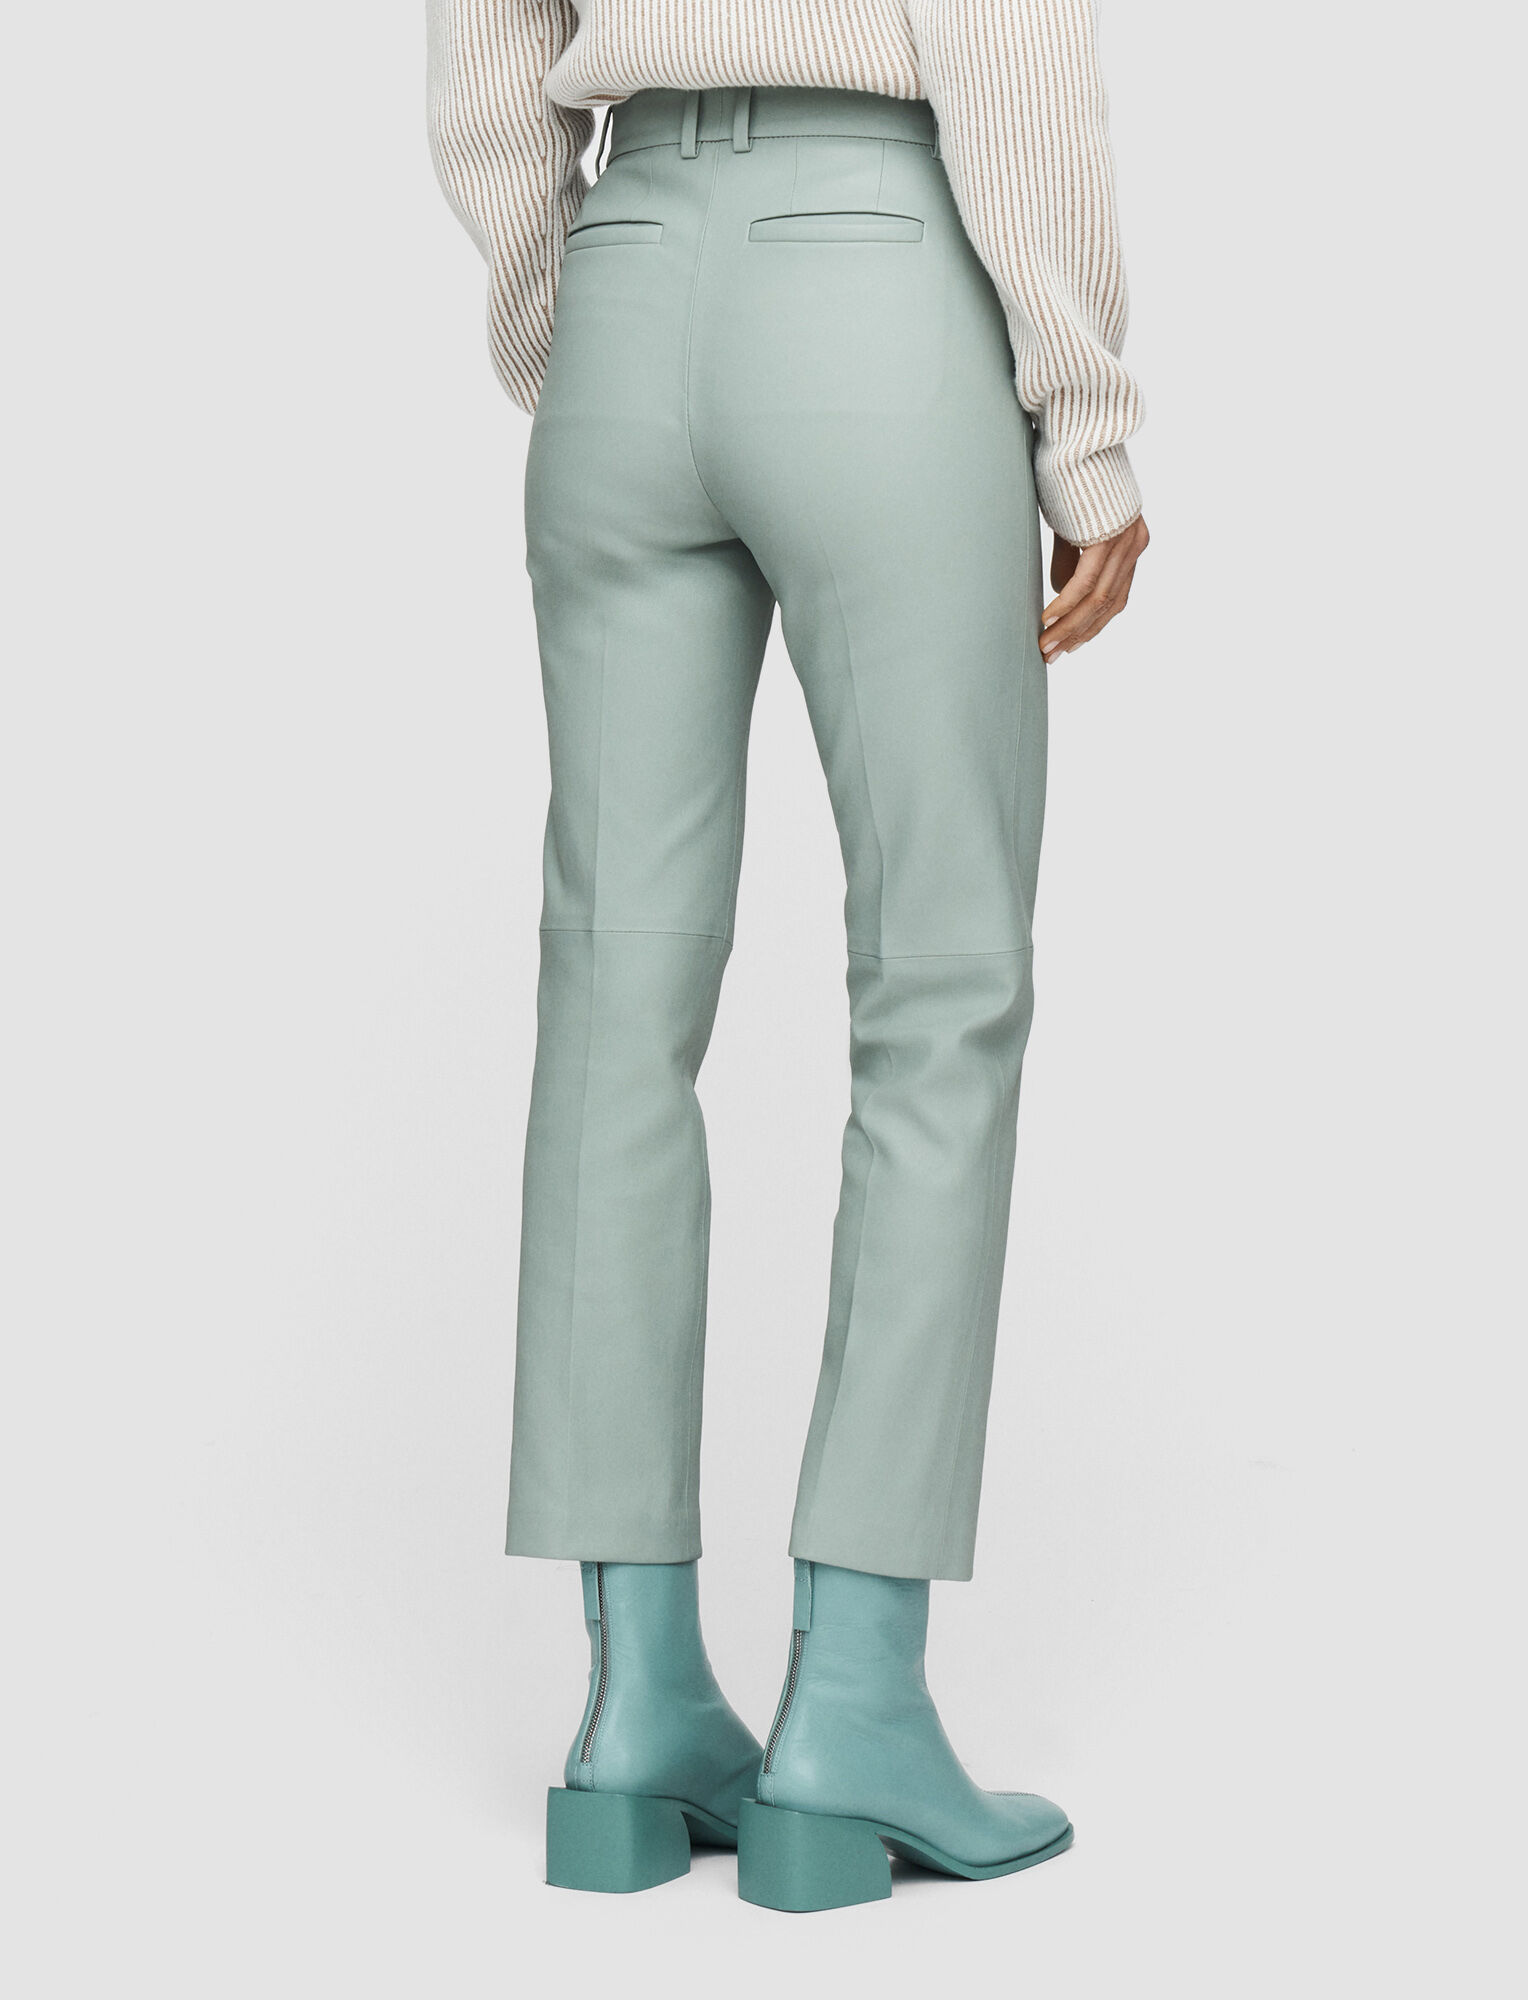 Joseph, Leather Stretch Coleman Trousers, in Sage